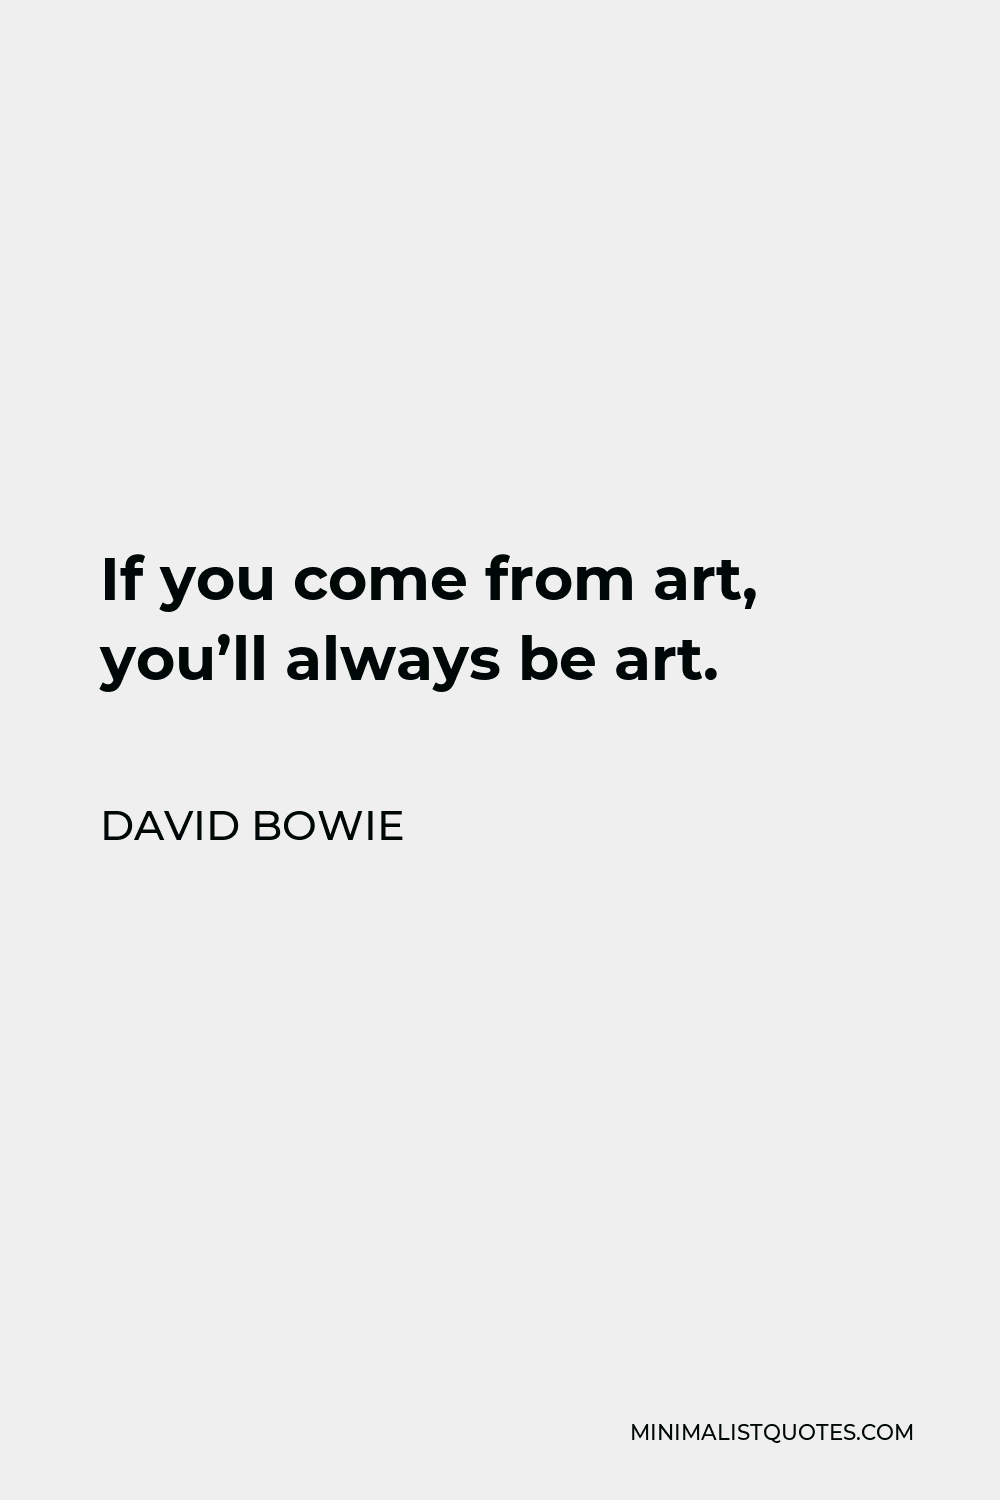 David Bowie Quote - If you come from art, you’ll always be art.